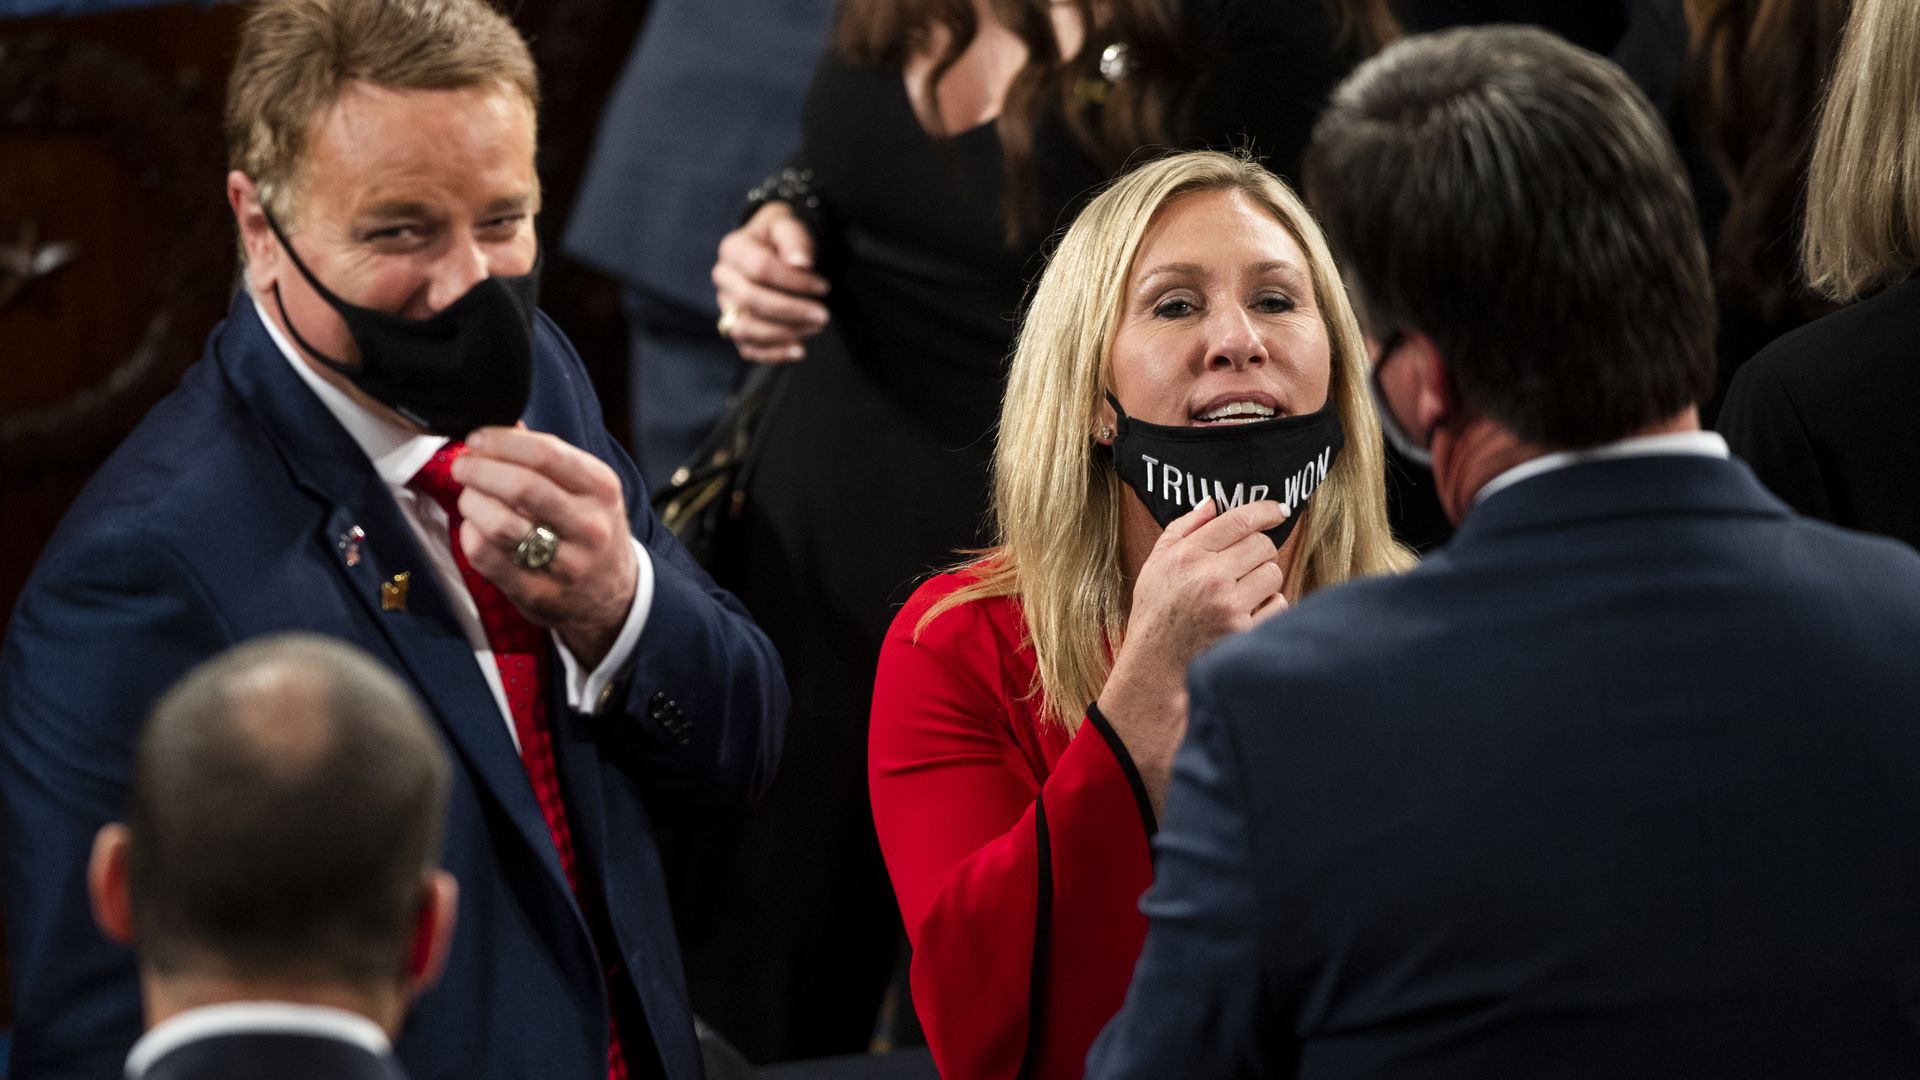 Rep. Marjorie Taylor Greene is seen pulling down her mask while speaking with a House colleague.